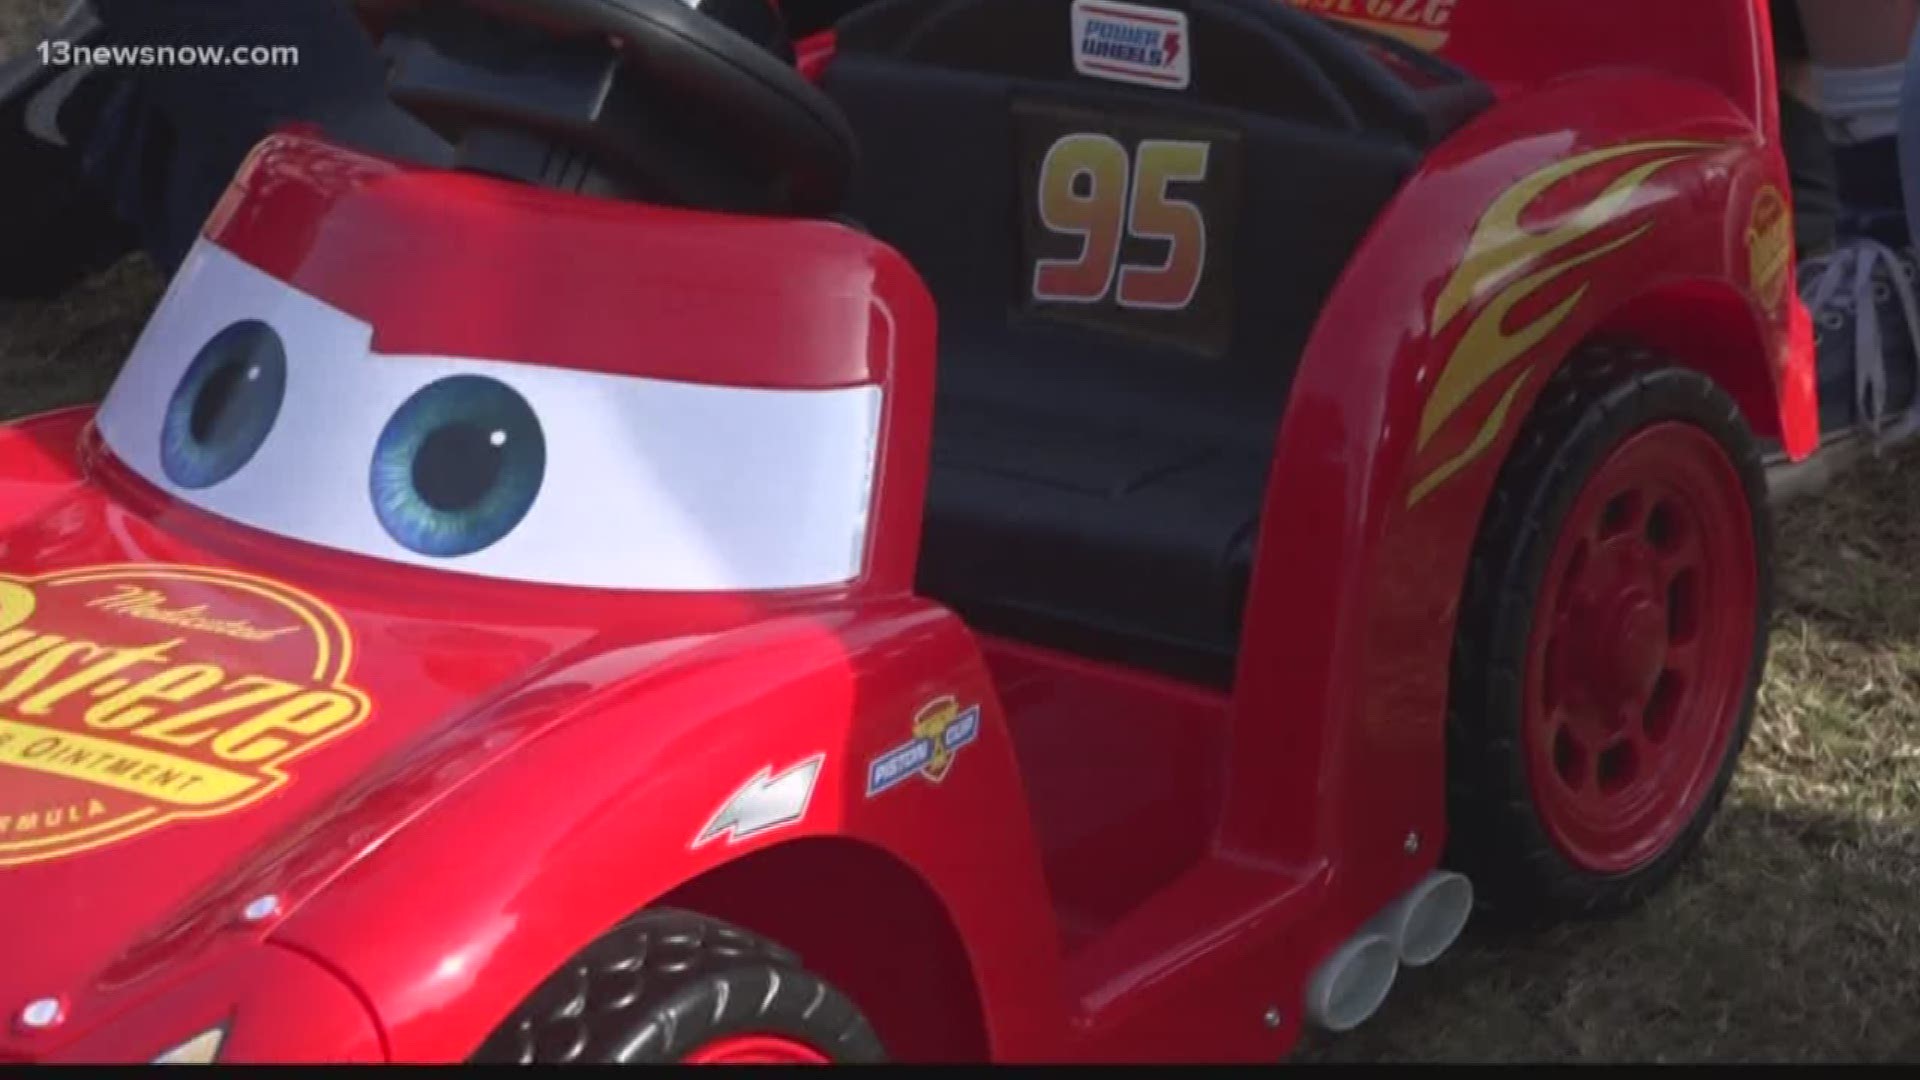 A special project at Old Dominion University is helping kids with disabilities.